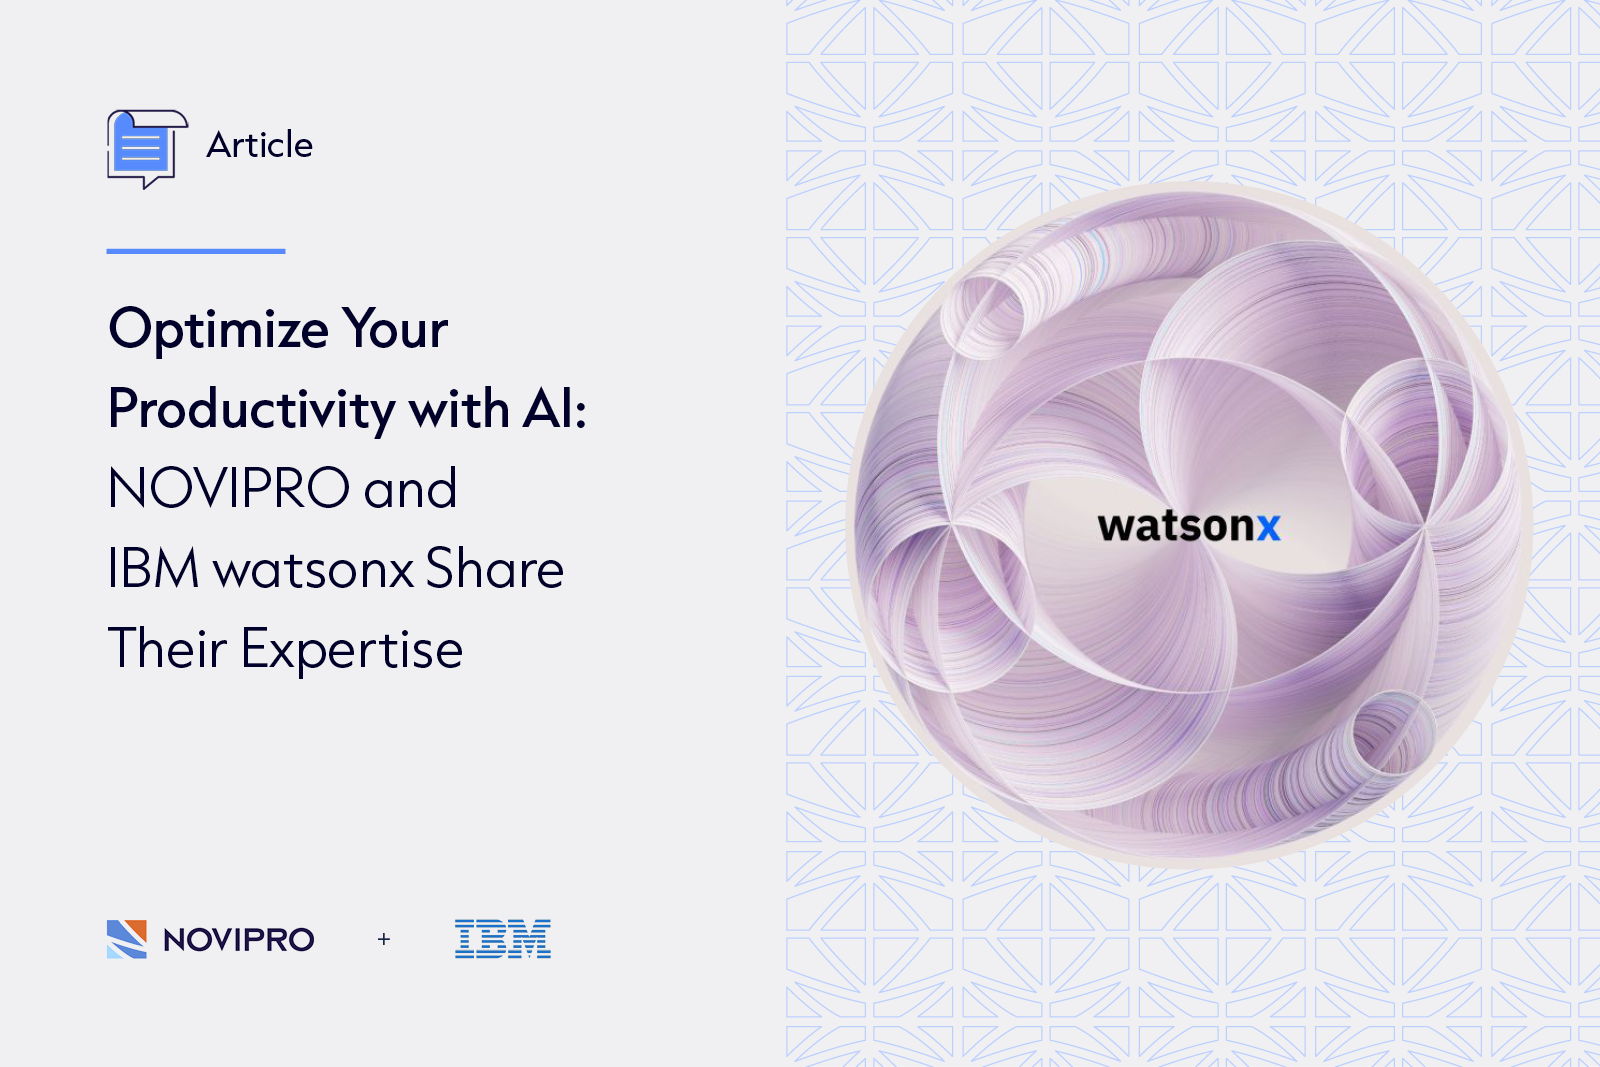 Optimize Your Productivity with AI: NOVIPRO and IBM watsonx Share Their Expertise